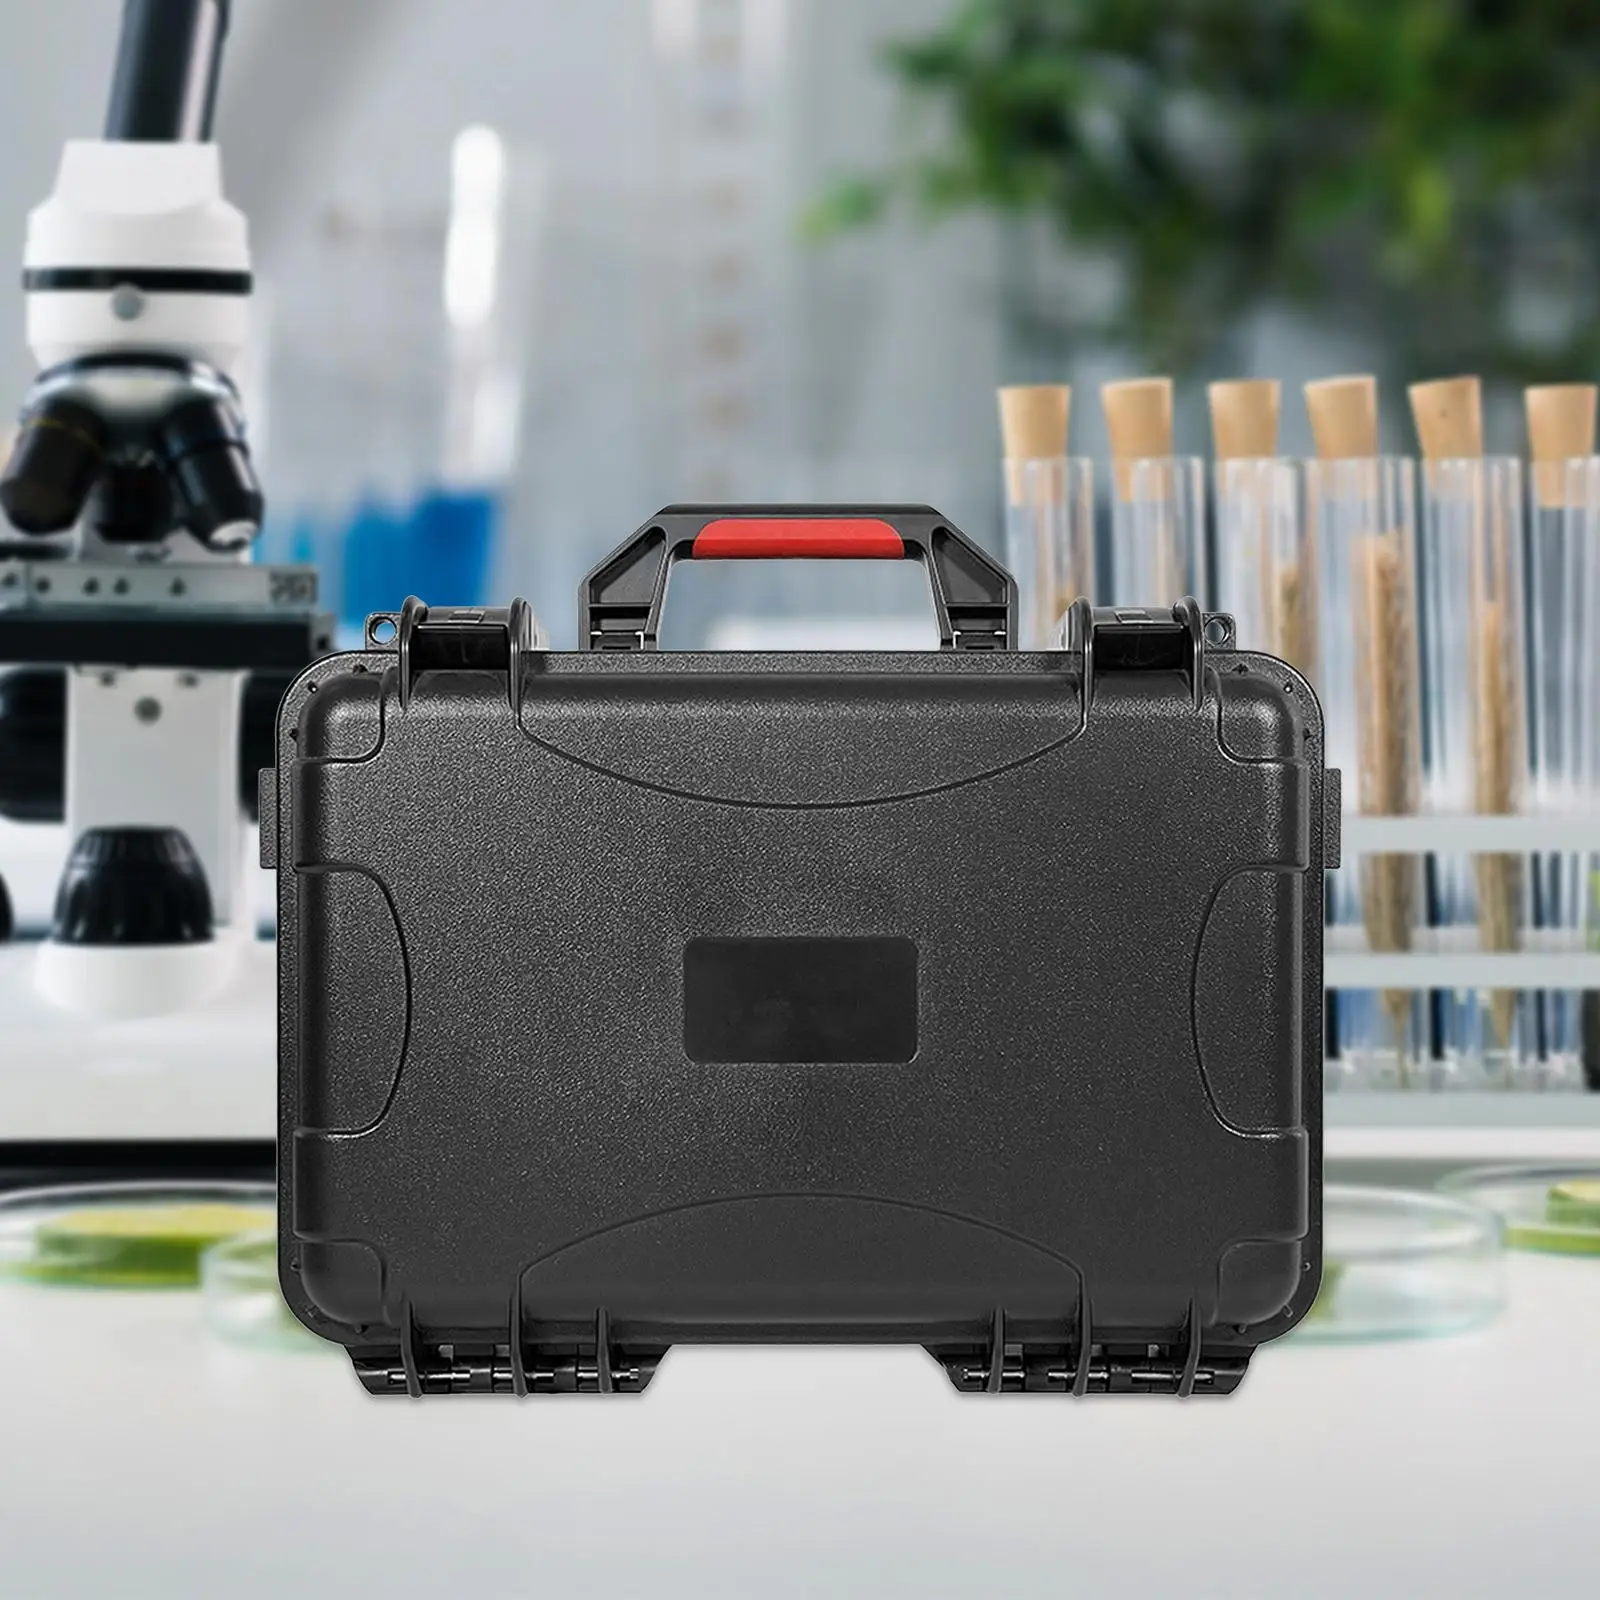 Multi Use Storage Organizer Protective Toolbox Anti Impact Dustproof Hard Case Waterproof Carrying Tool Box for Outdoor Hone